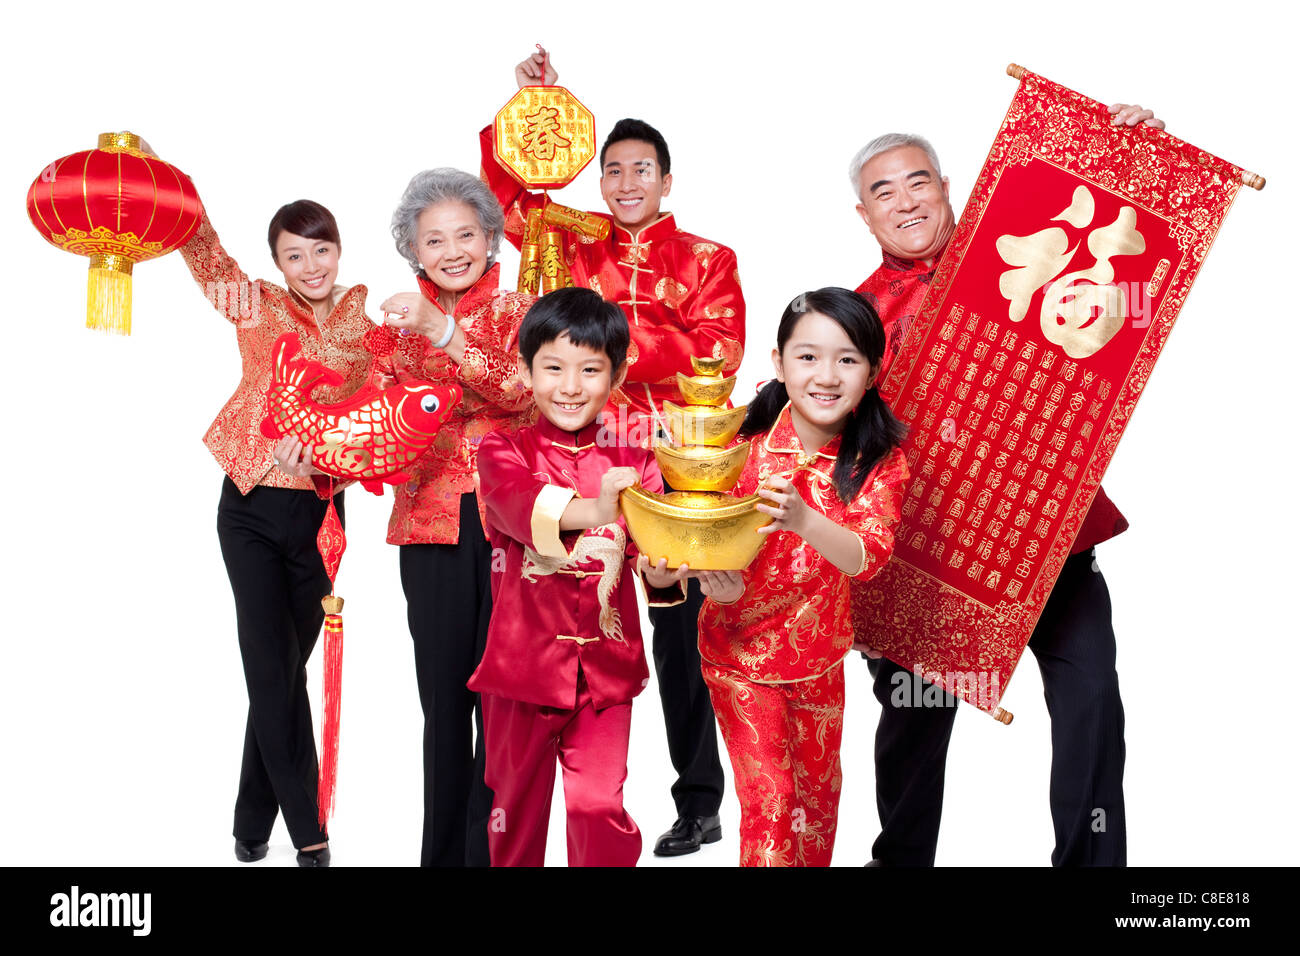 Family Dressed in Traditional Clothing Celebrating Chinese New Year Stock Photo ...1300 x 956